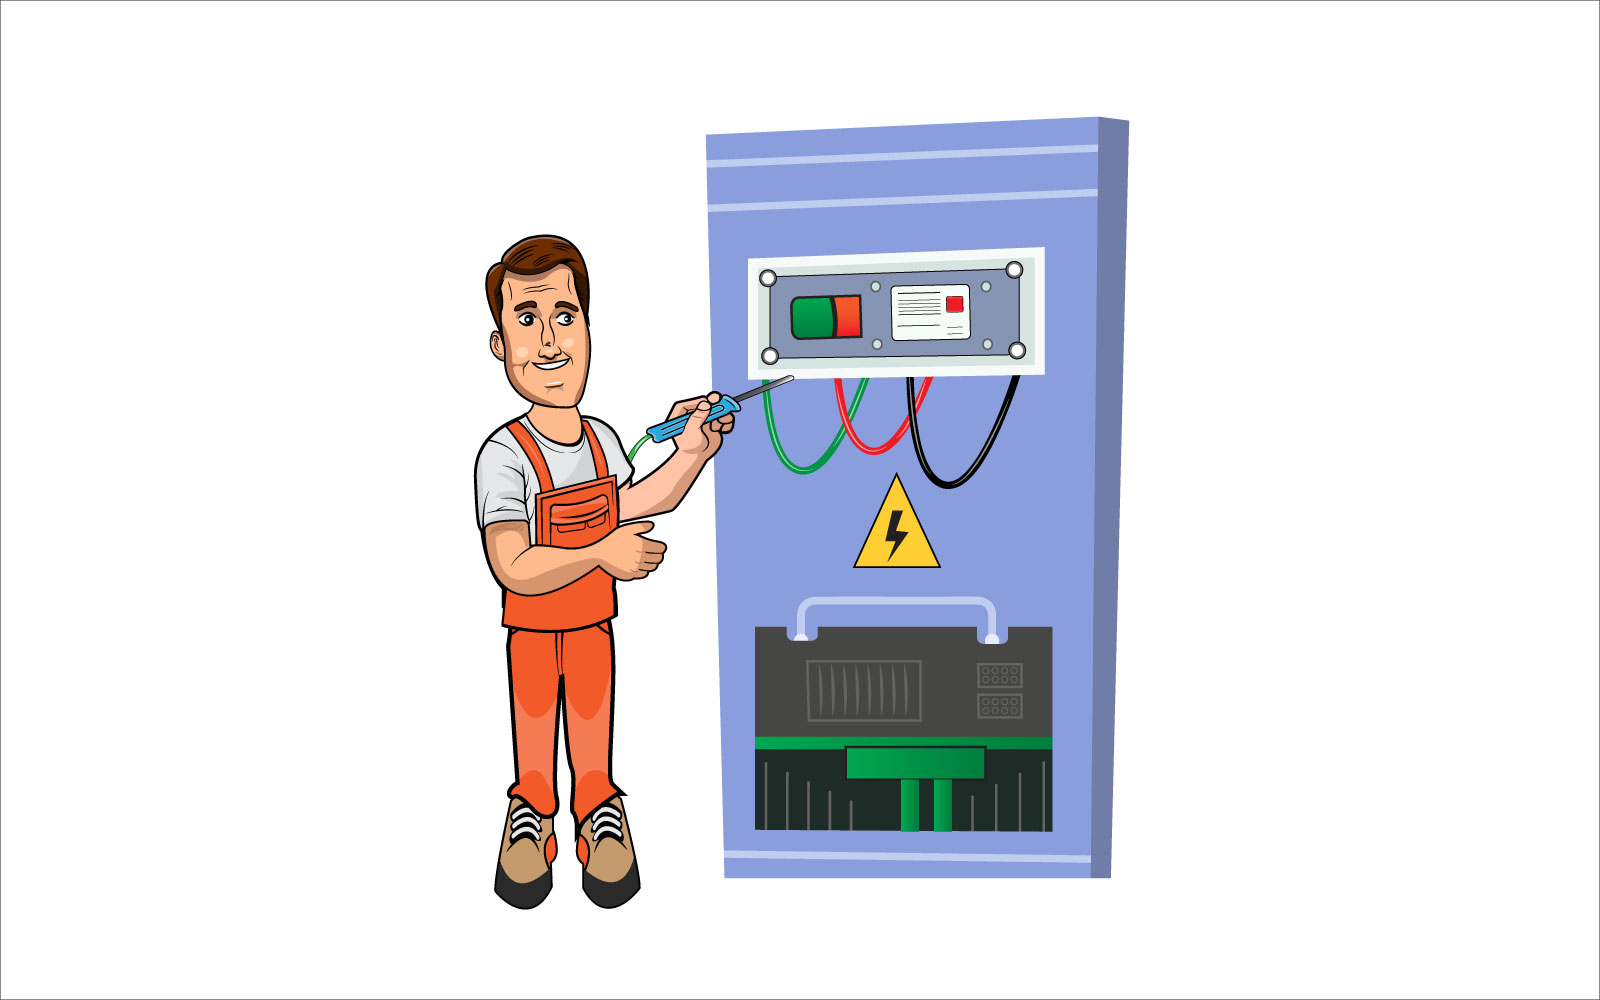 Illustration of electrician working with electrical panel board